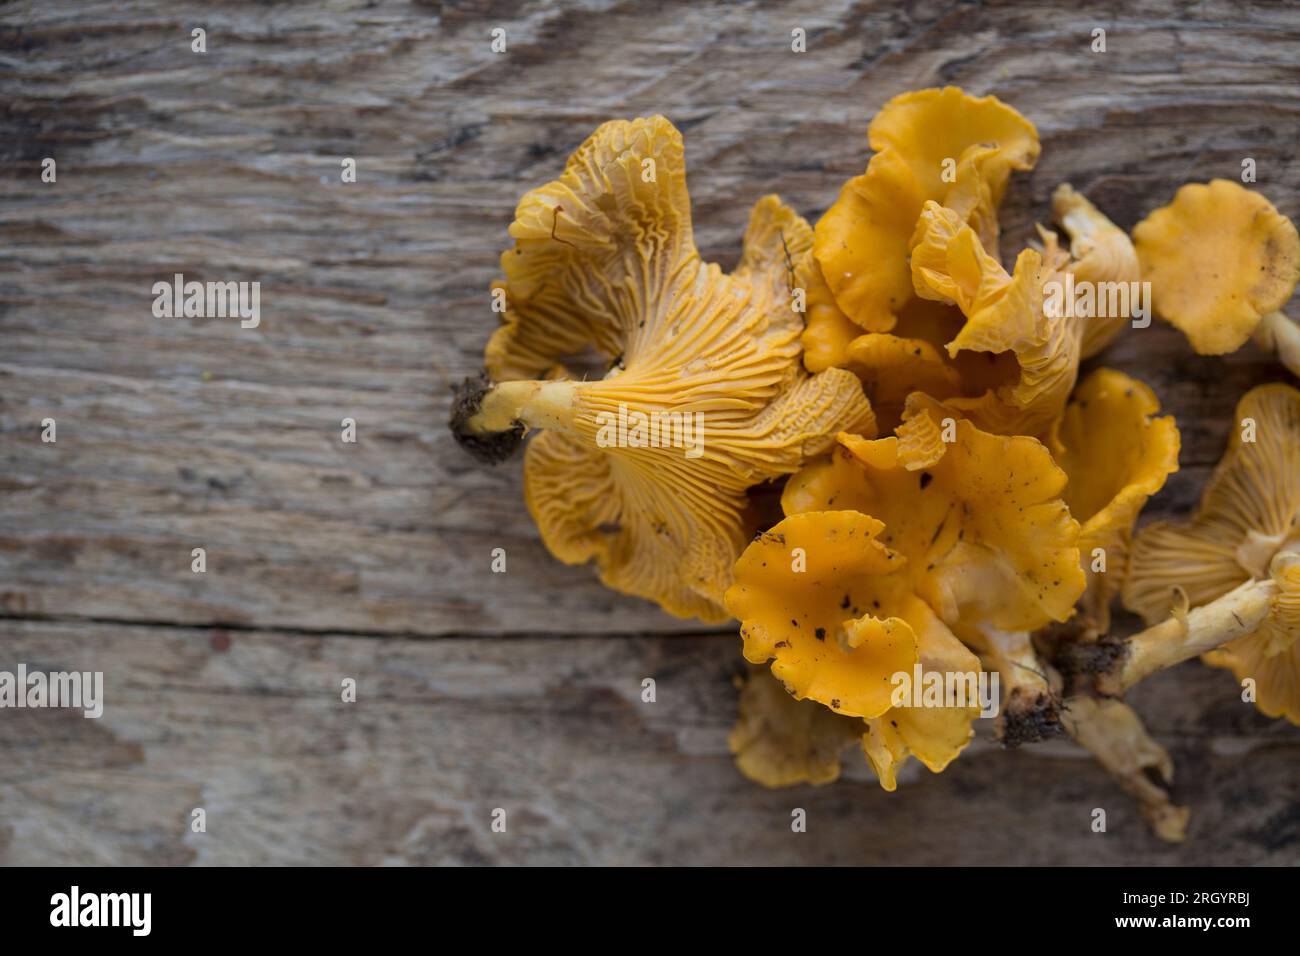 Chanterelles, Cantharellus cibarius, displayed on a wooden board. Mushroom foraging has become popular but great care must be taken to correctly ident Stock Photo